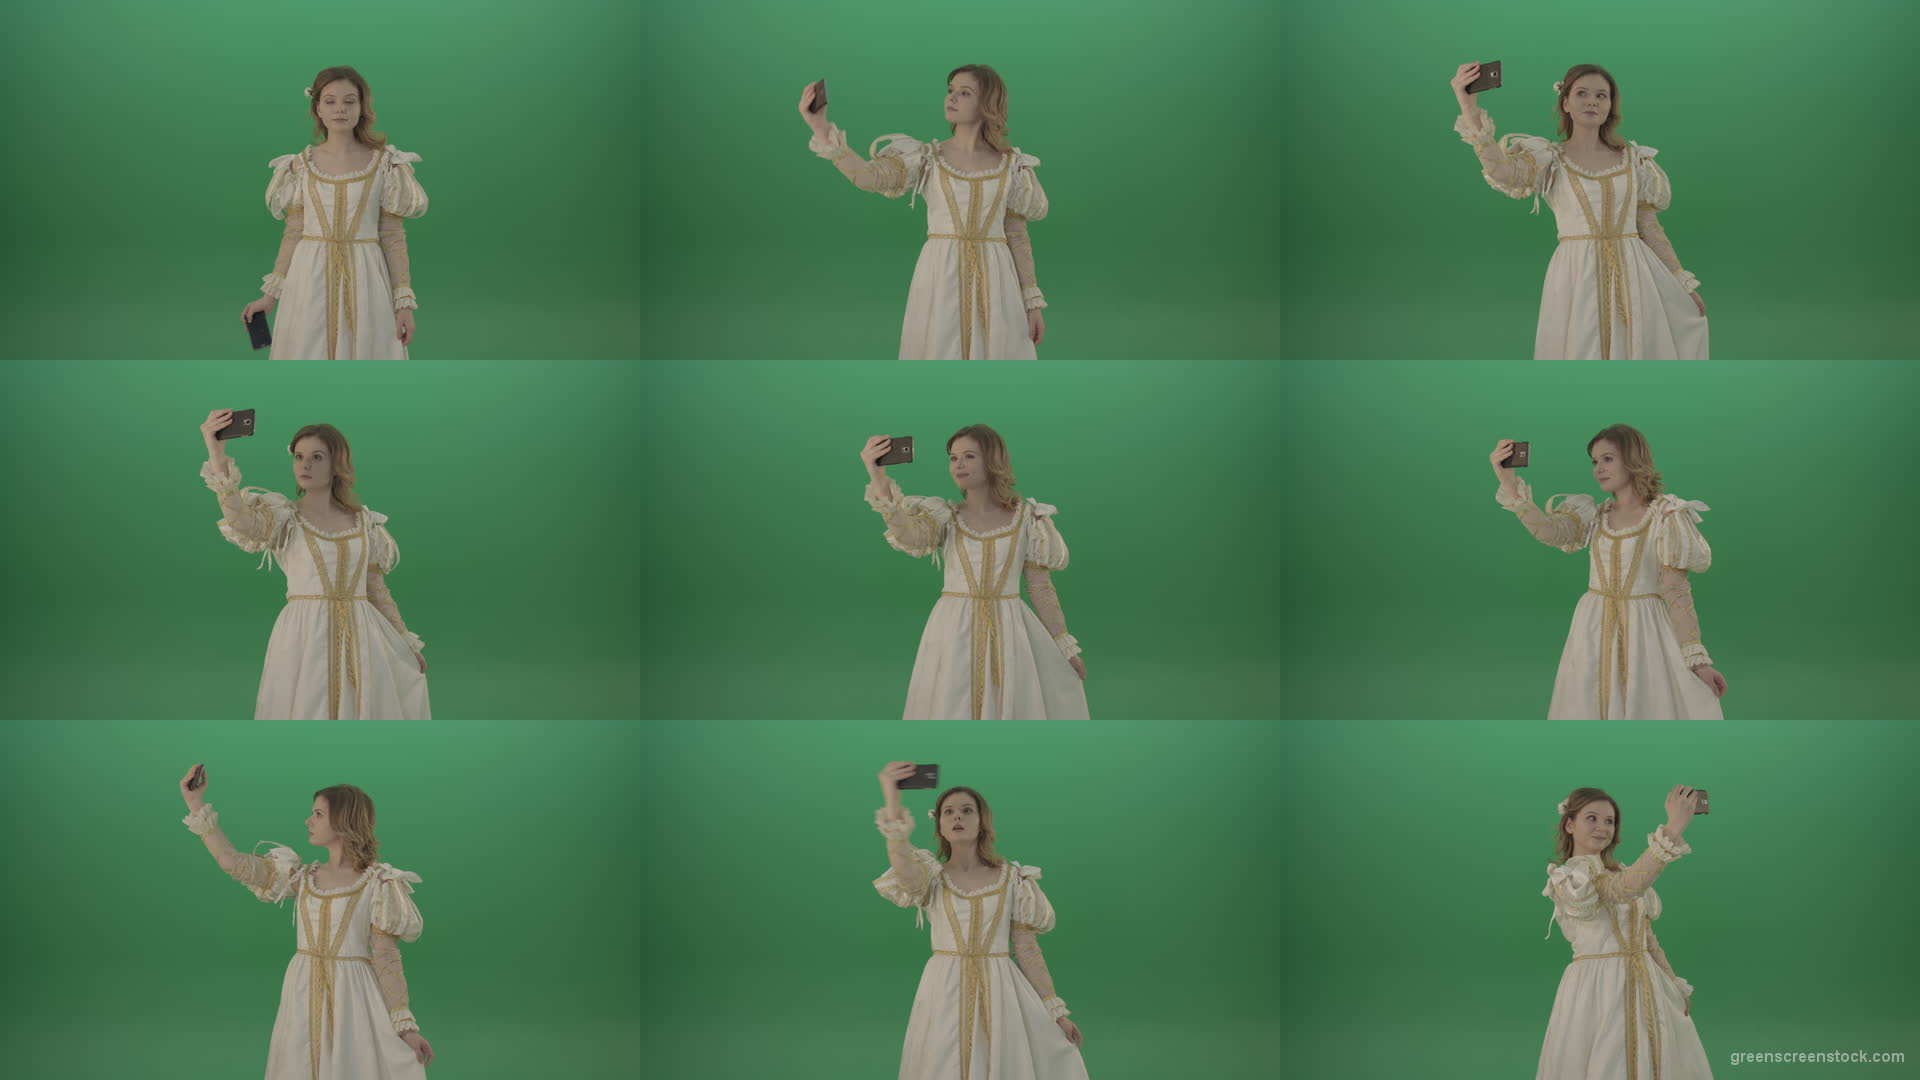 Princess-girl-dressed-in-a-light-suit-makes-a-sephi-on-a-modern-phone-isolated-on-chromakey-background Green Screen Stock